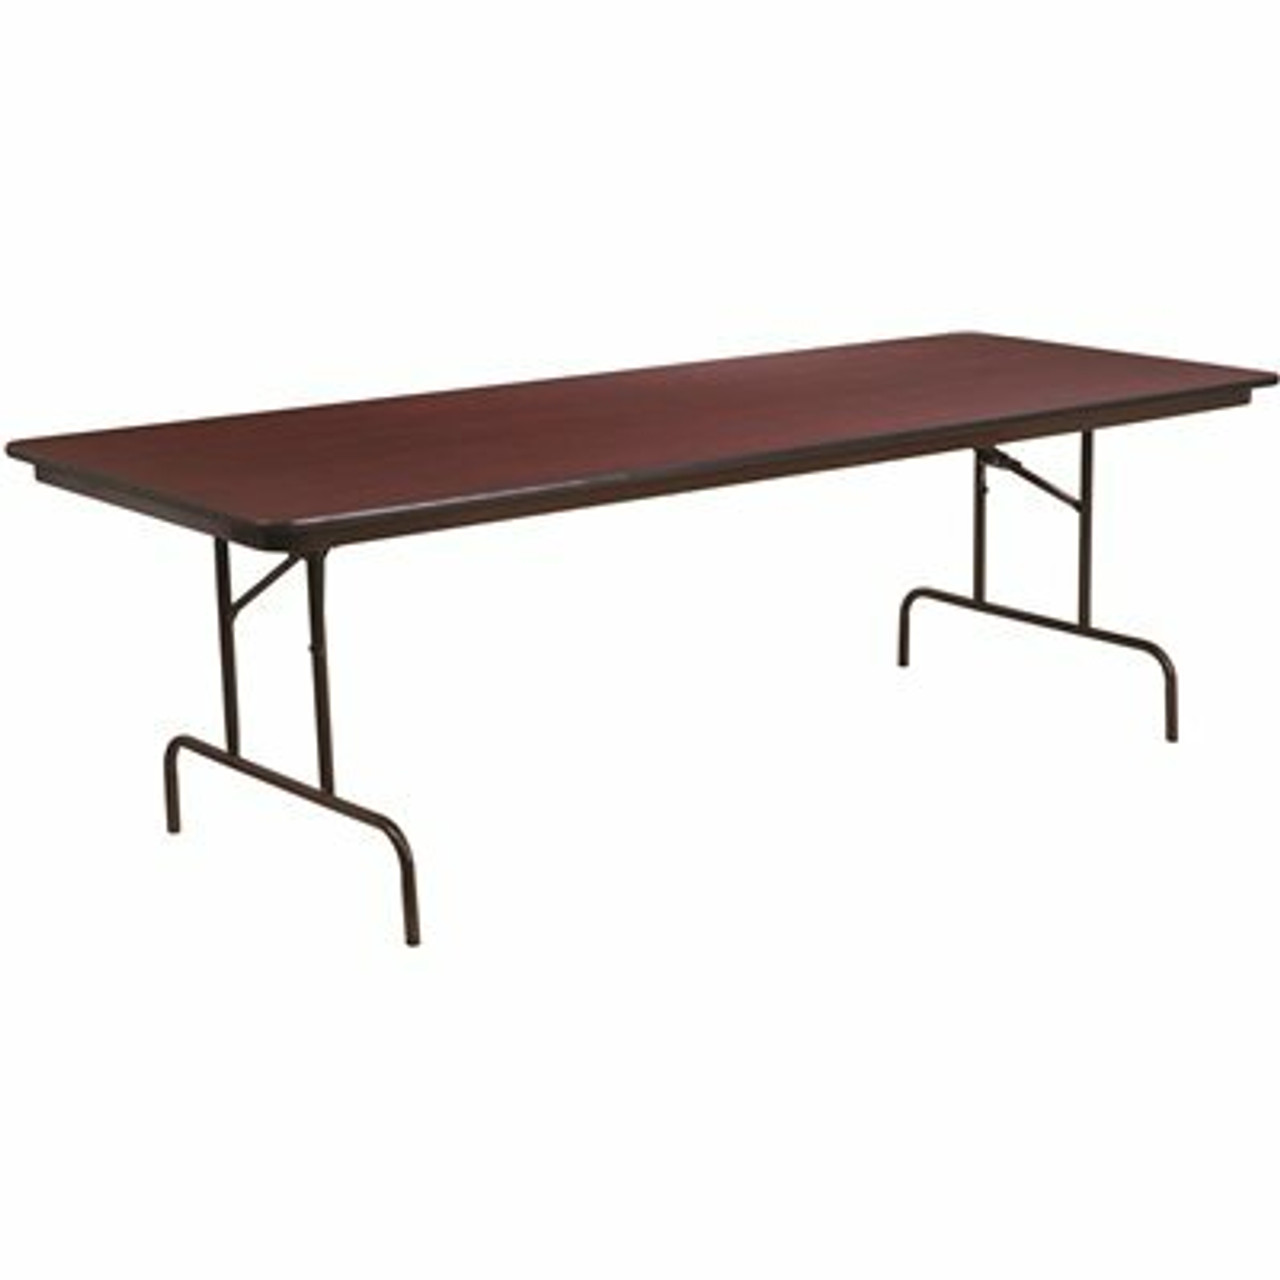 96 In. Mahogany Wood Table Top Material Folding Banquet Tables - 308688174